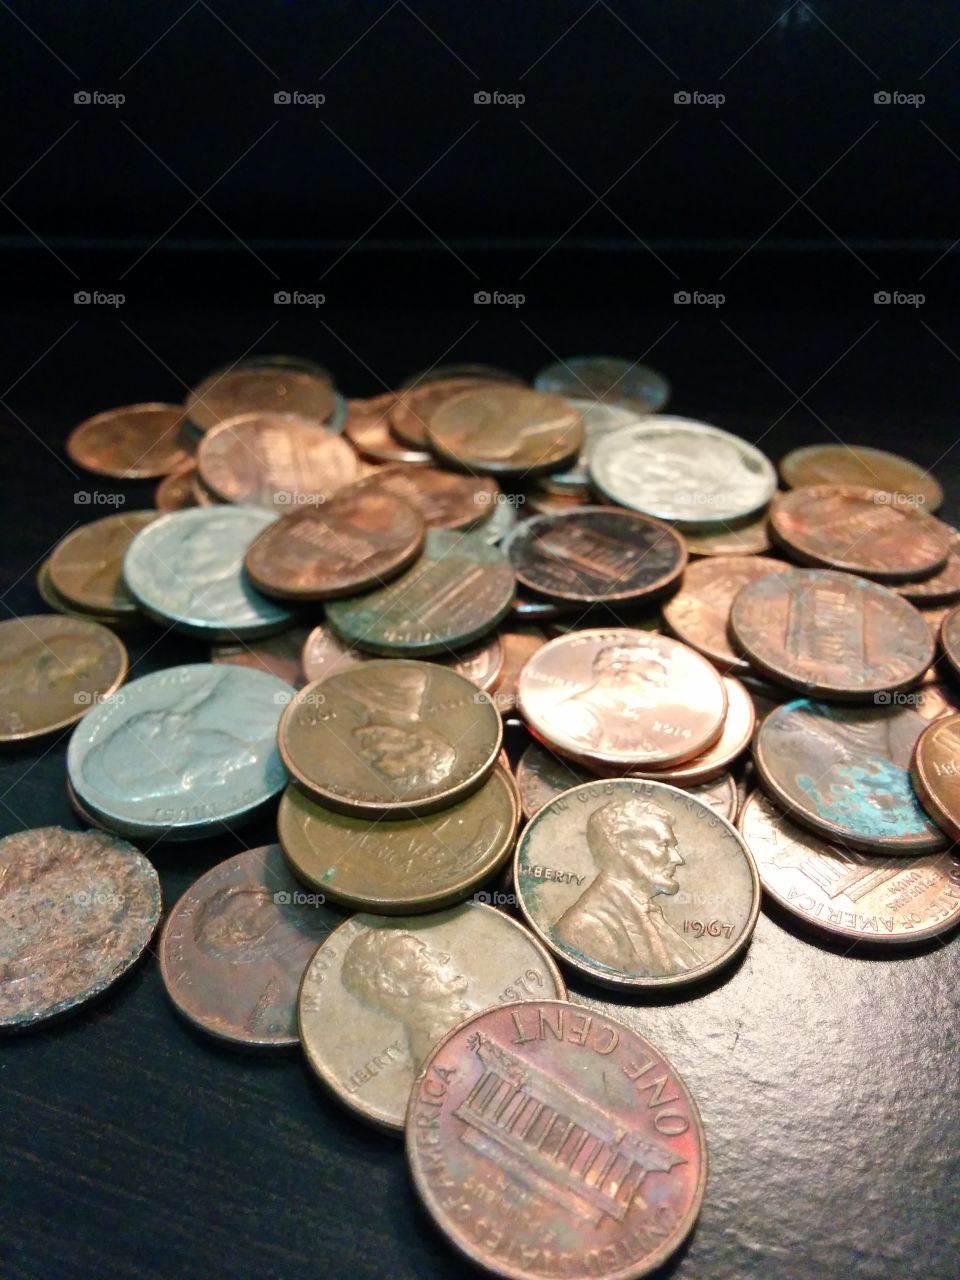 Savings. Coins I picked from the streets.